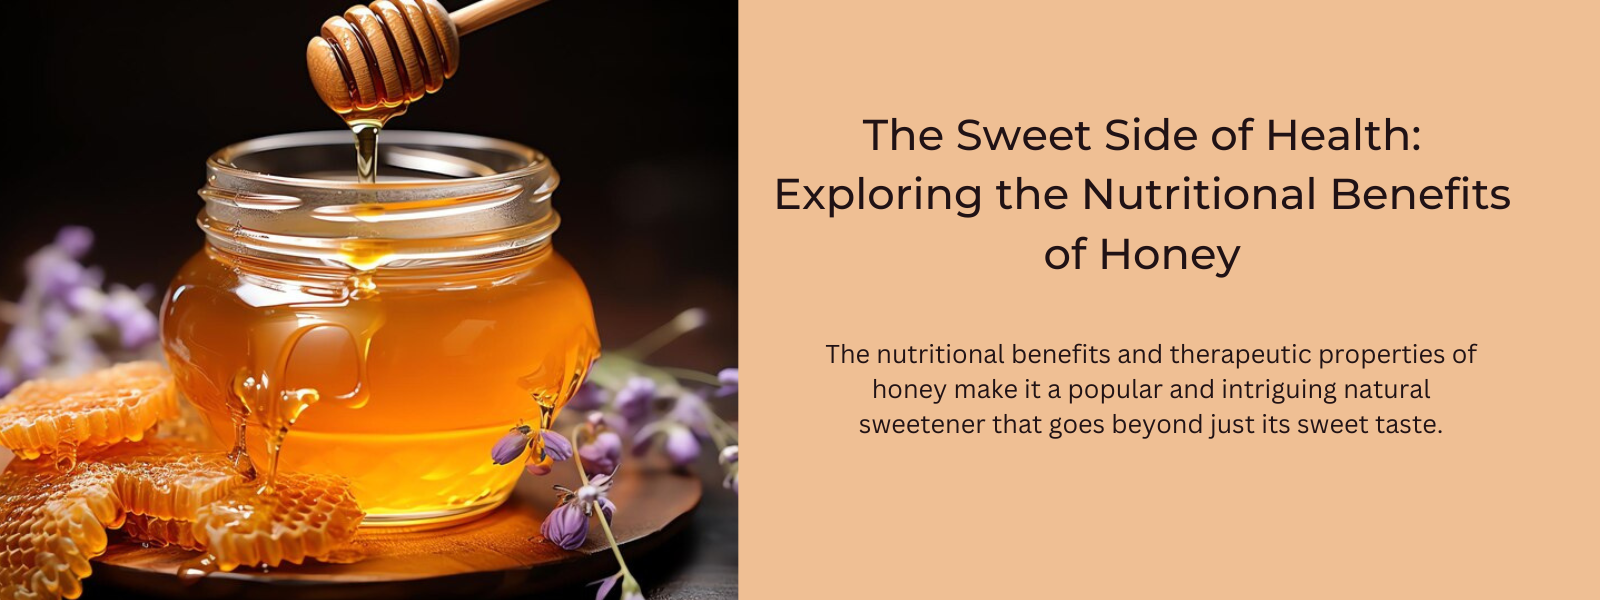 The Sweet Side of Health: Exploring the Nutritional Benefits of Honey